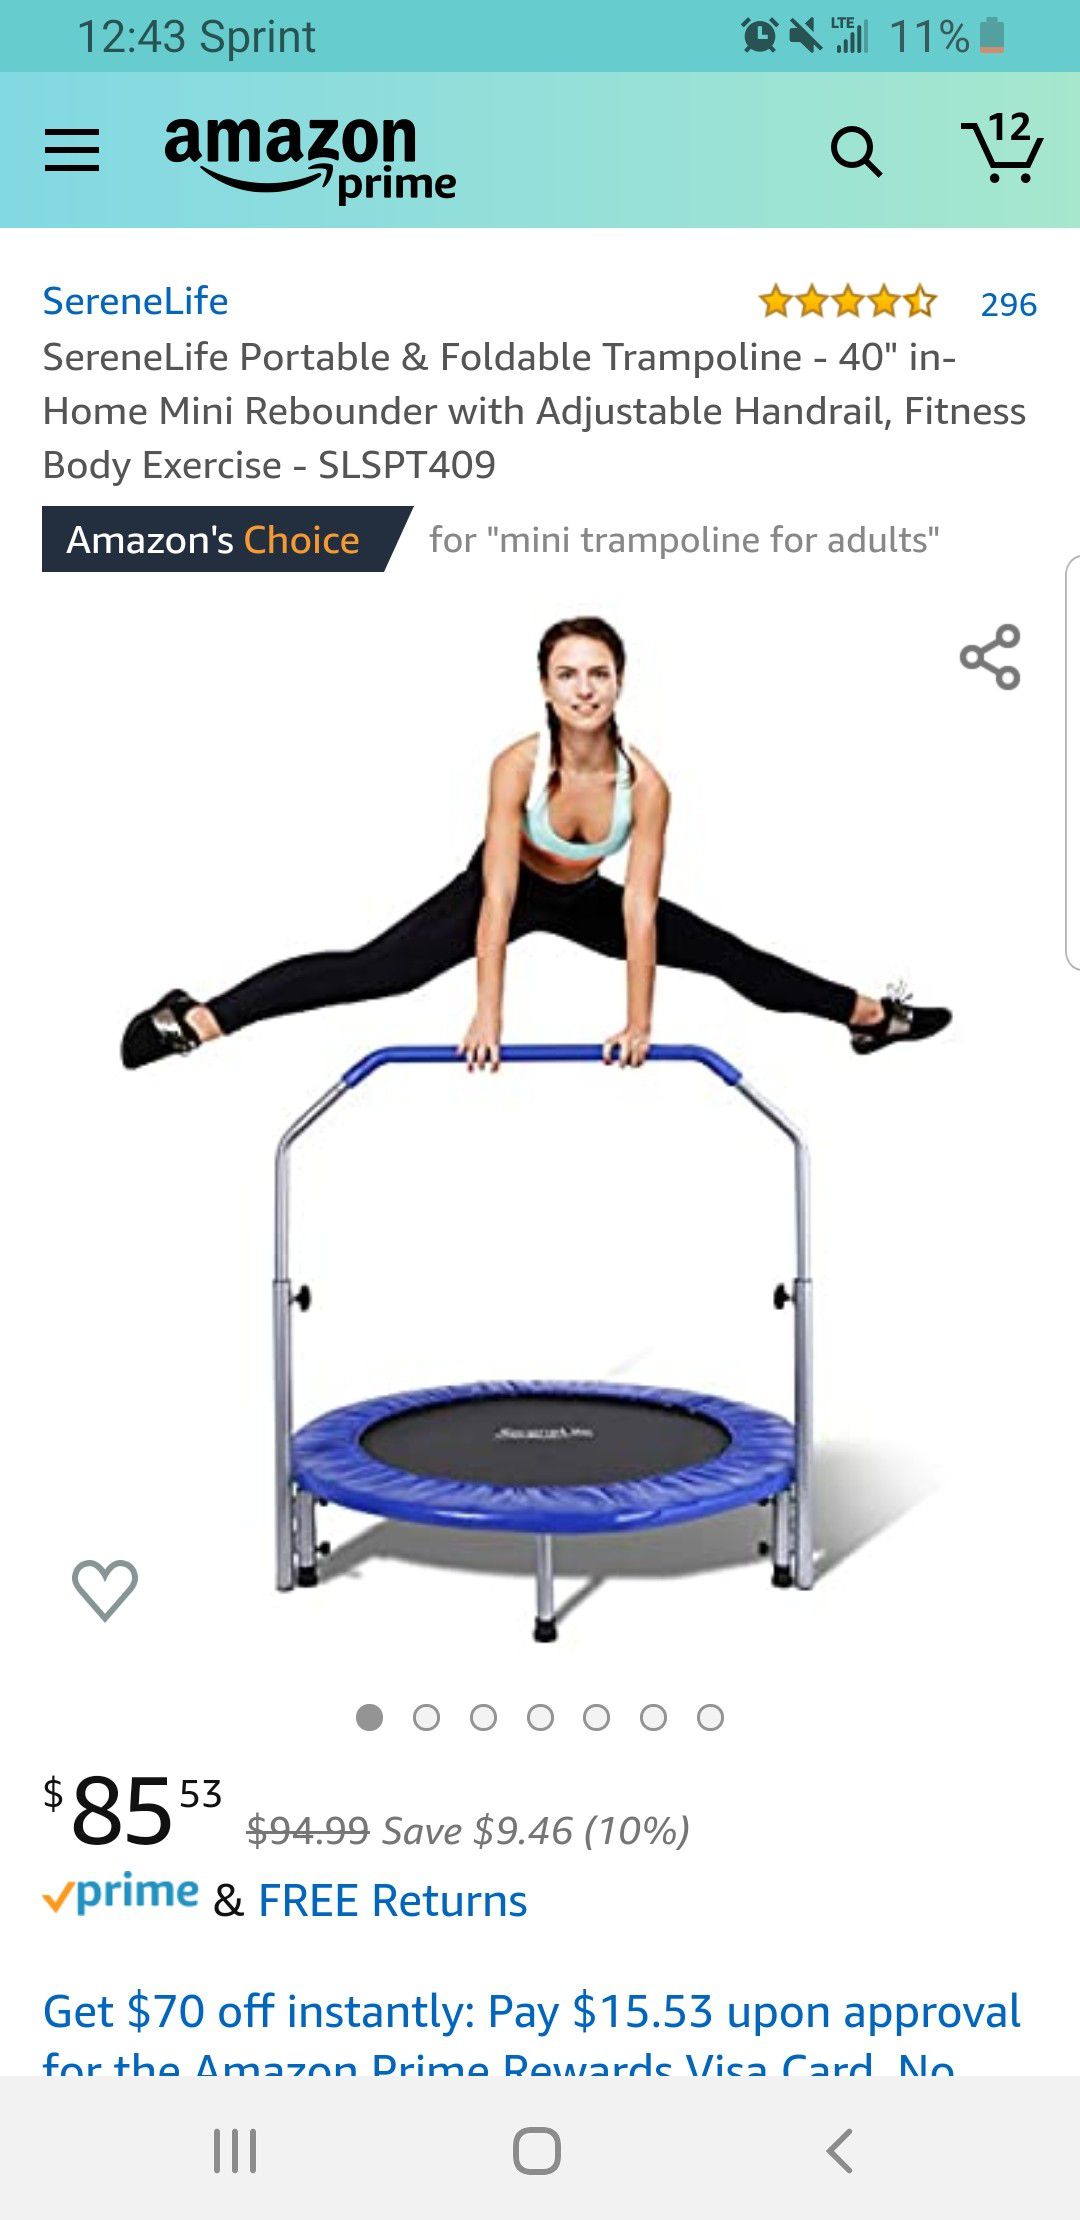 SereneLife Portable & Foldable Trampoline 40" in home mini Rebounder with Fitness Body Exercise SLSPT409 PLEASE READ